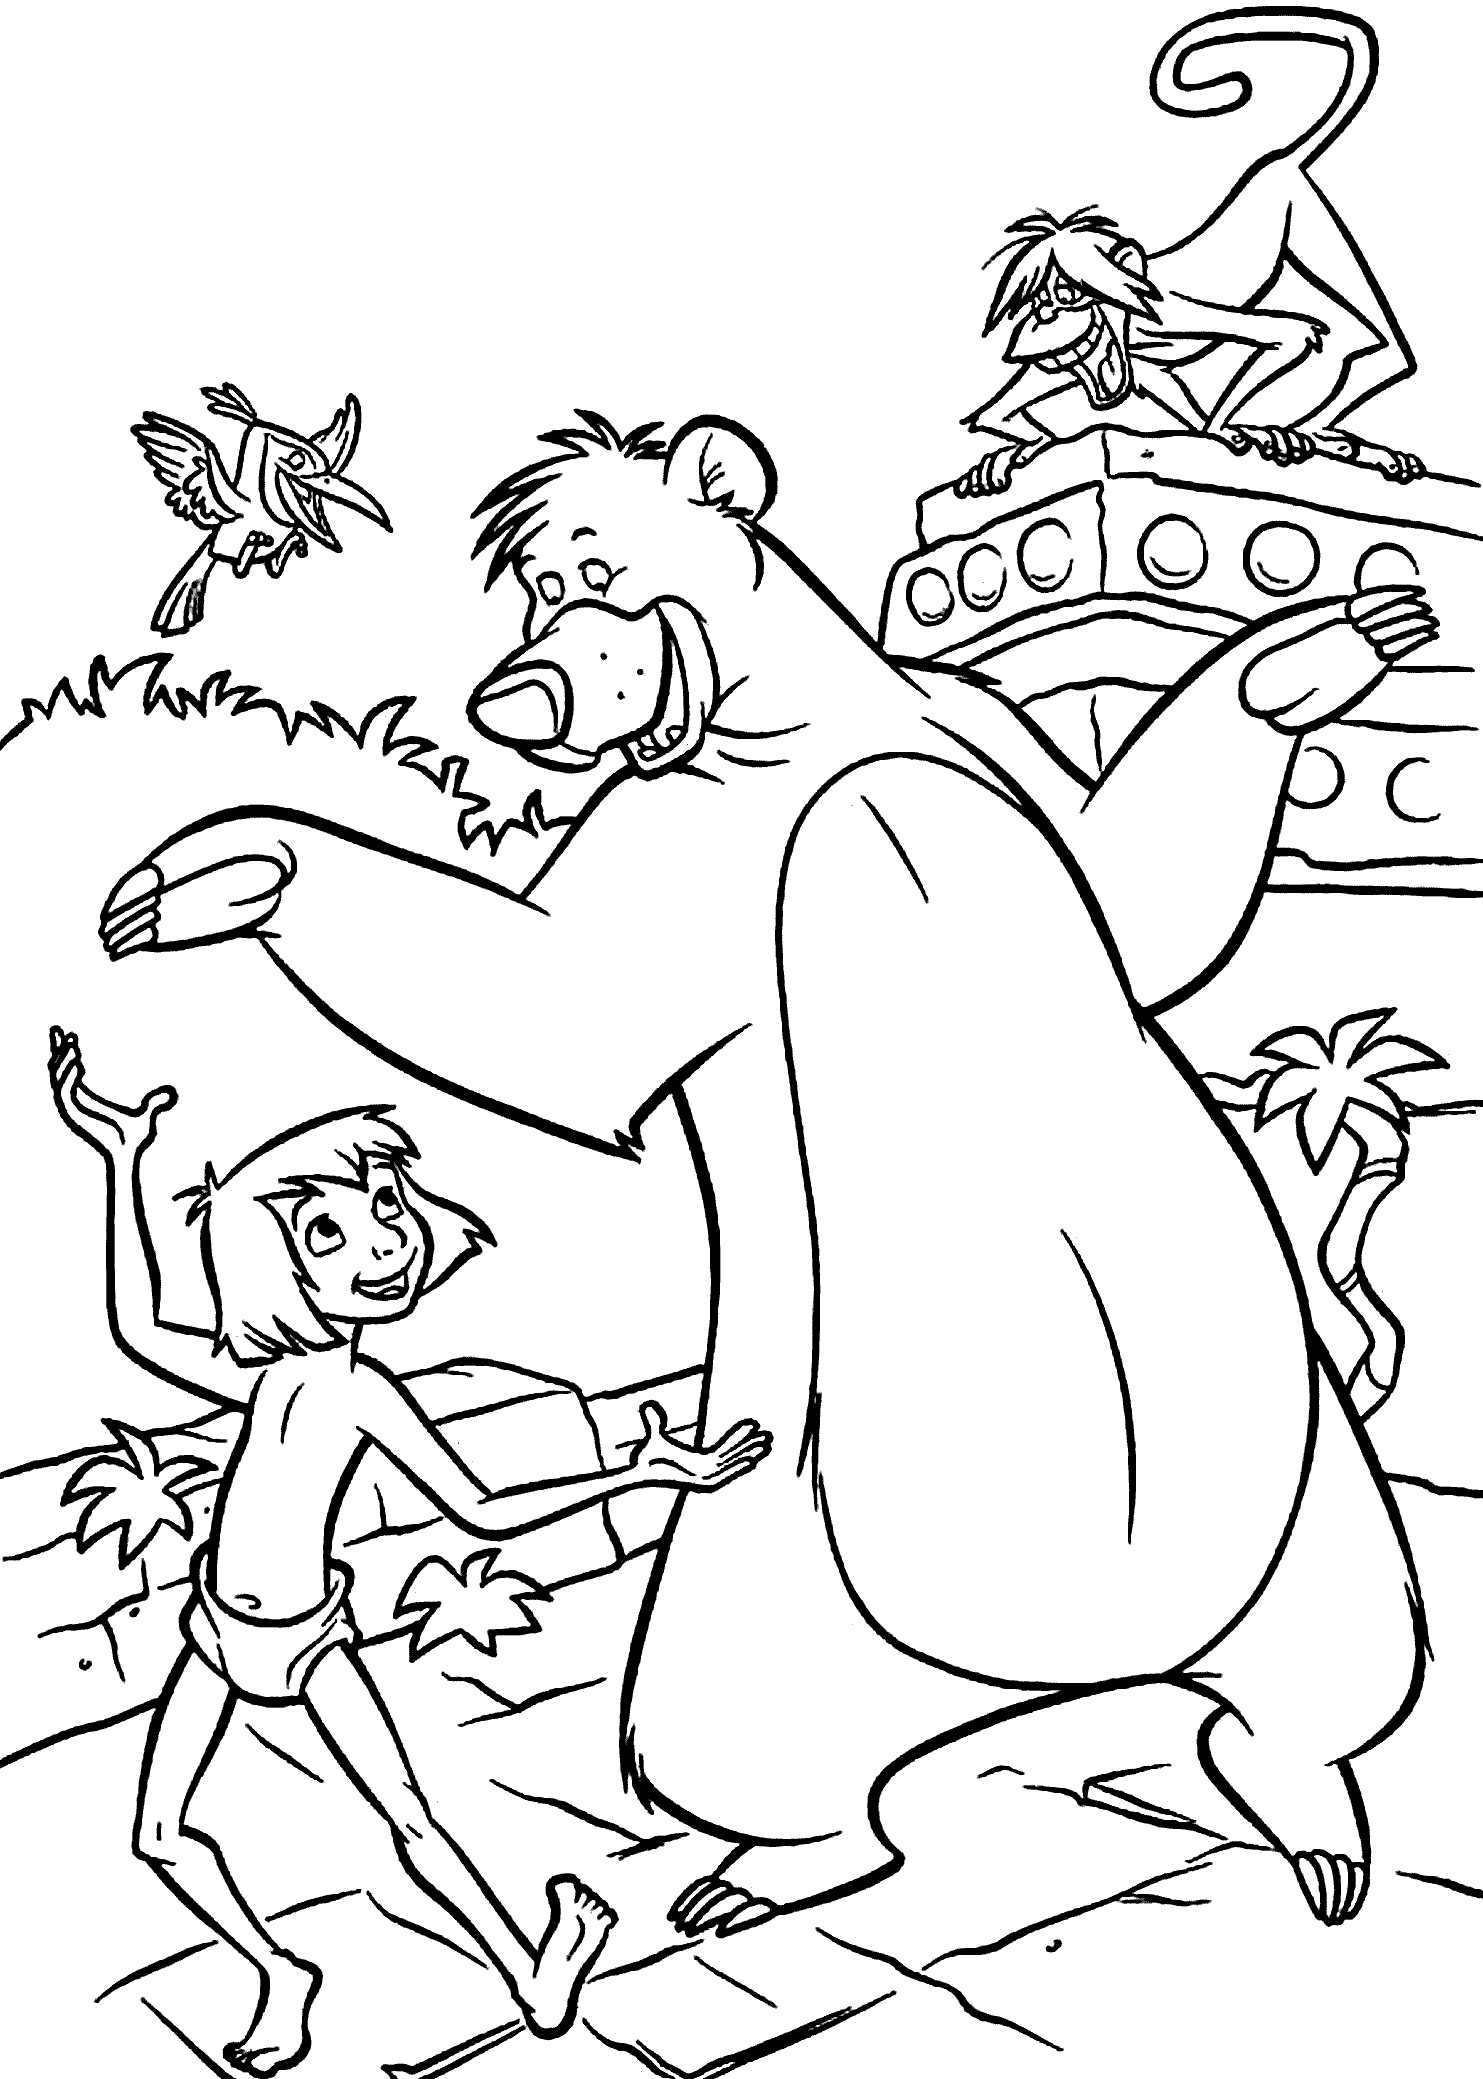 coloring pages jungle jungle coloring pages to download and print for free pages coloring jungle 